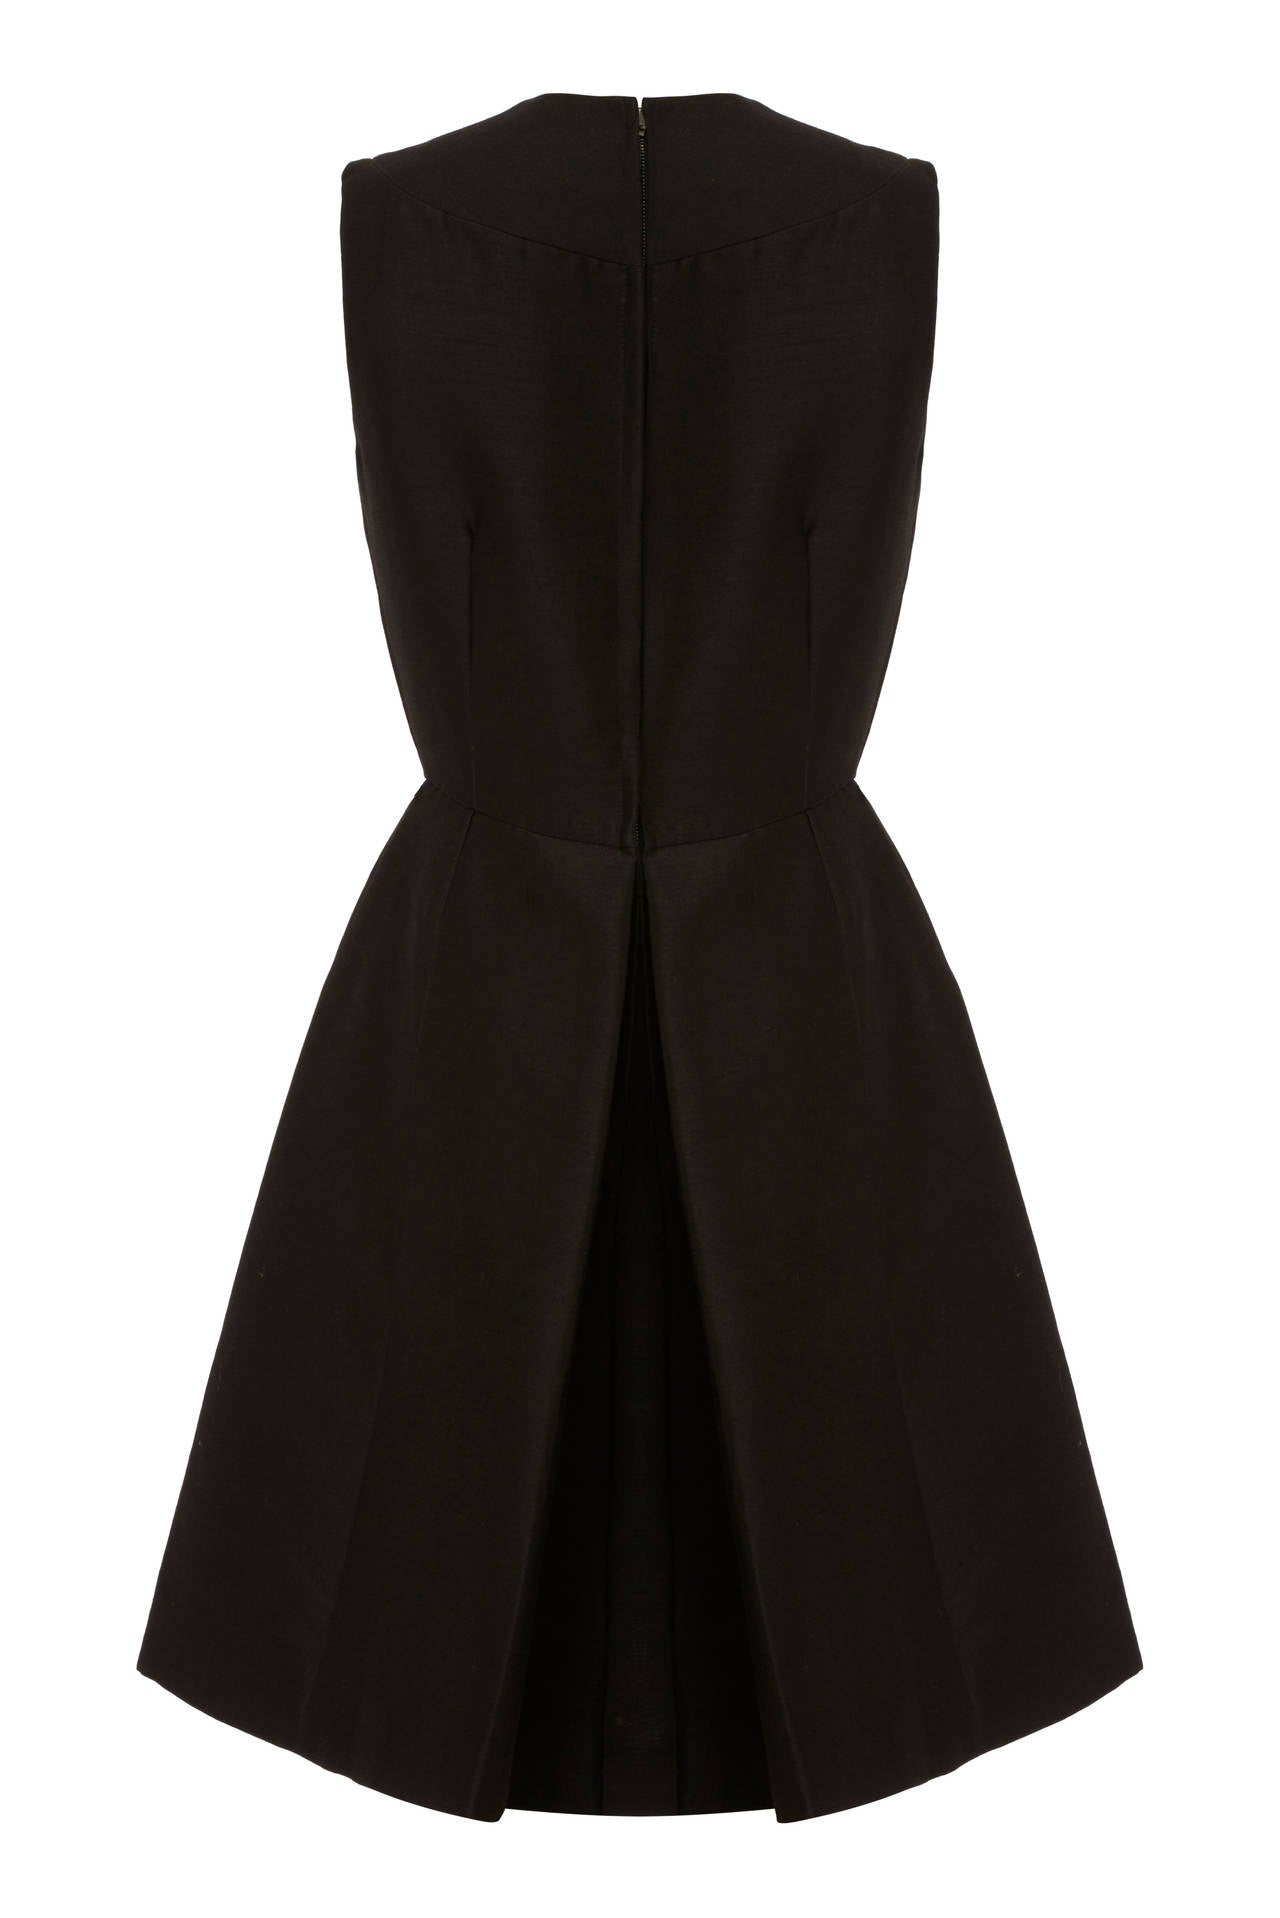 This 1960s chic black silk - wool blend mod-style cocktail dress from high end American department store I. Magnin is of excellent quality and is in pristine vintage condition. This versatile piece is sleeveless with a knee length skirt that flares